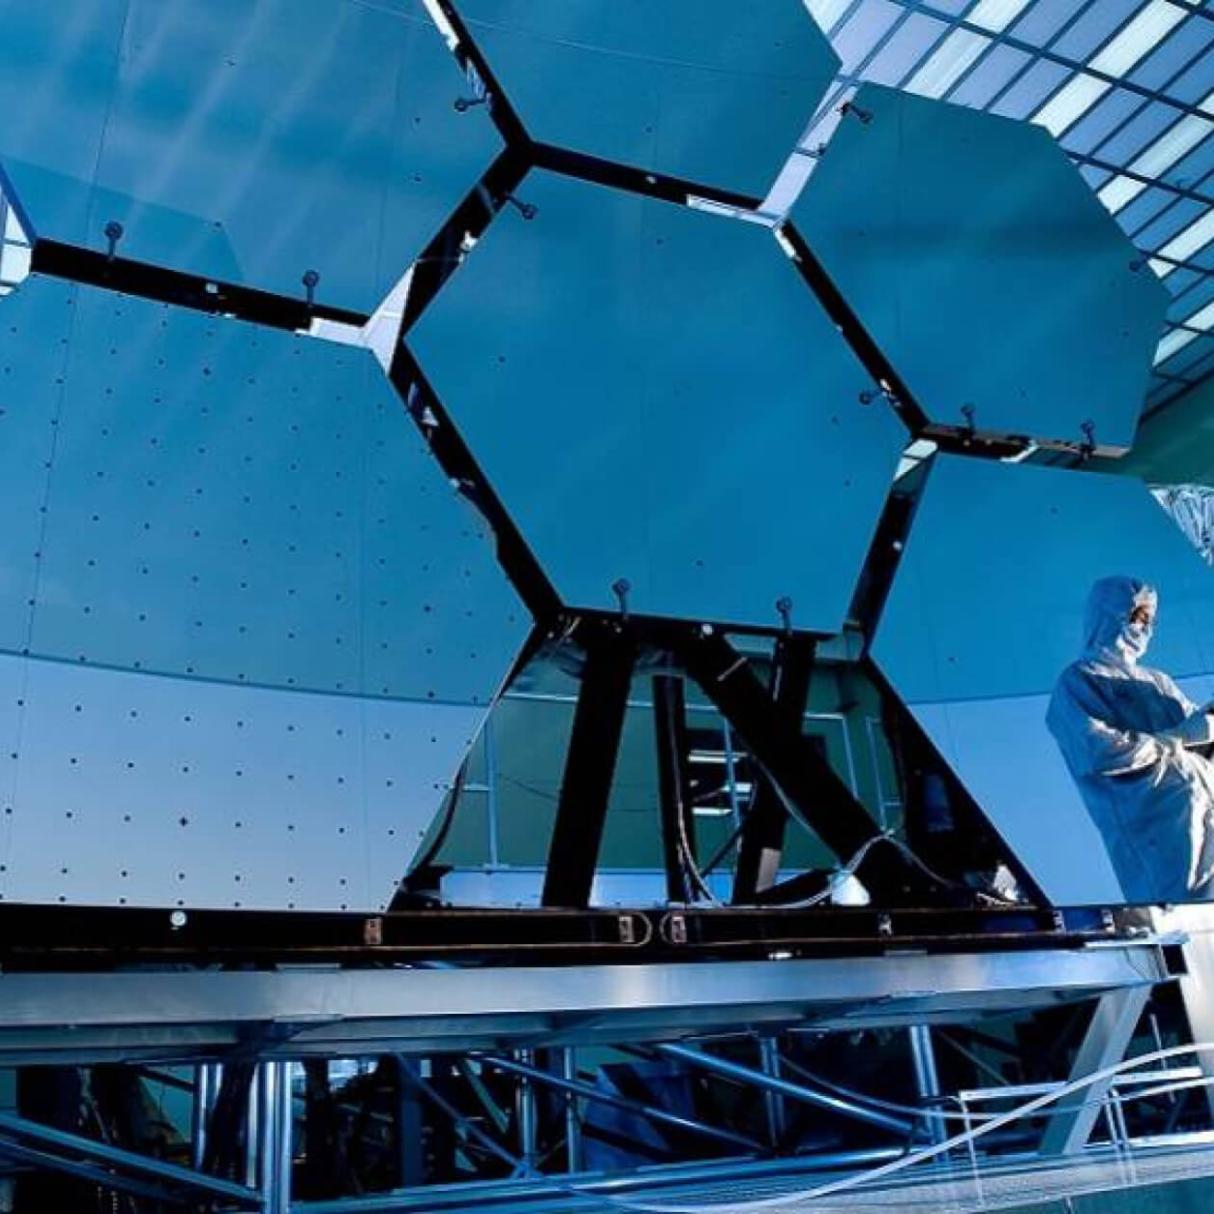 A scientist inspects a group of large industrial panels